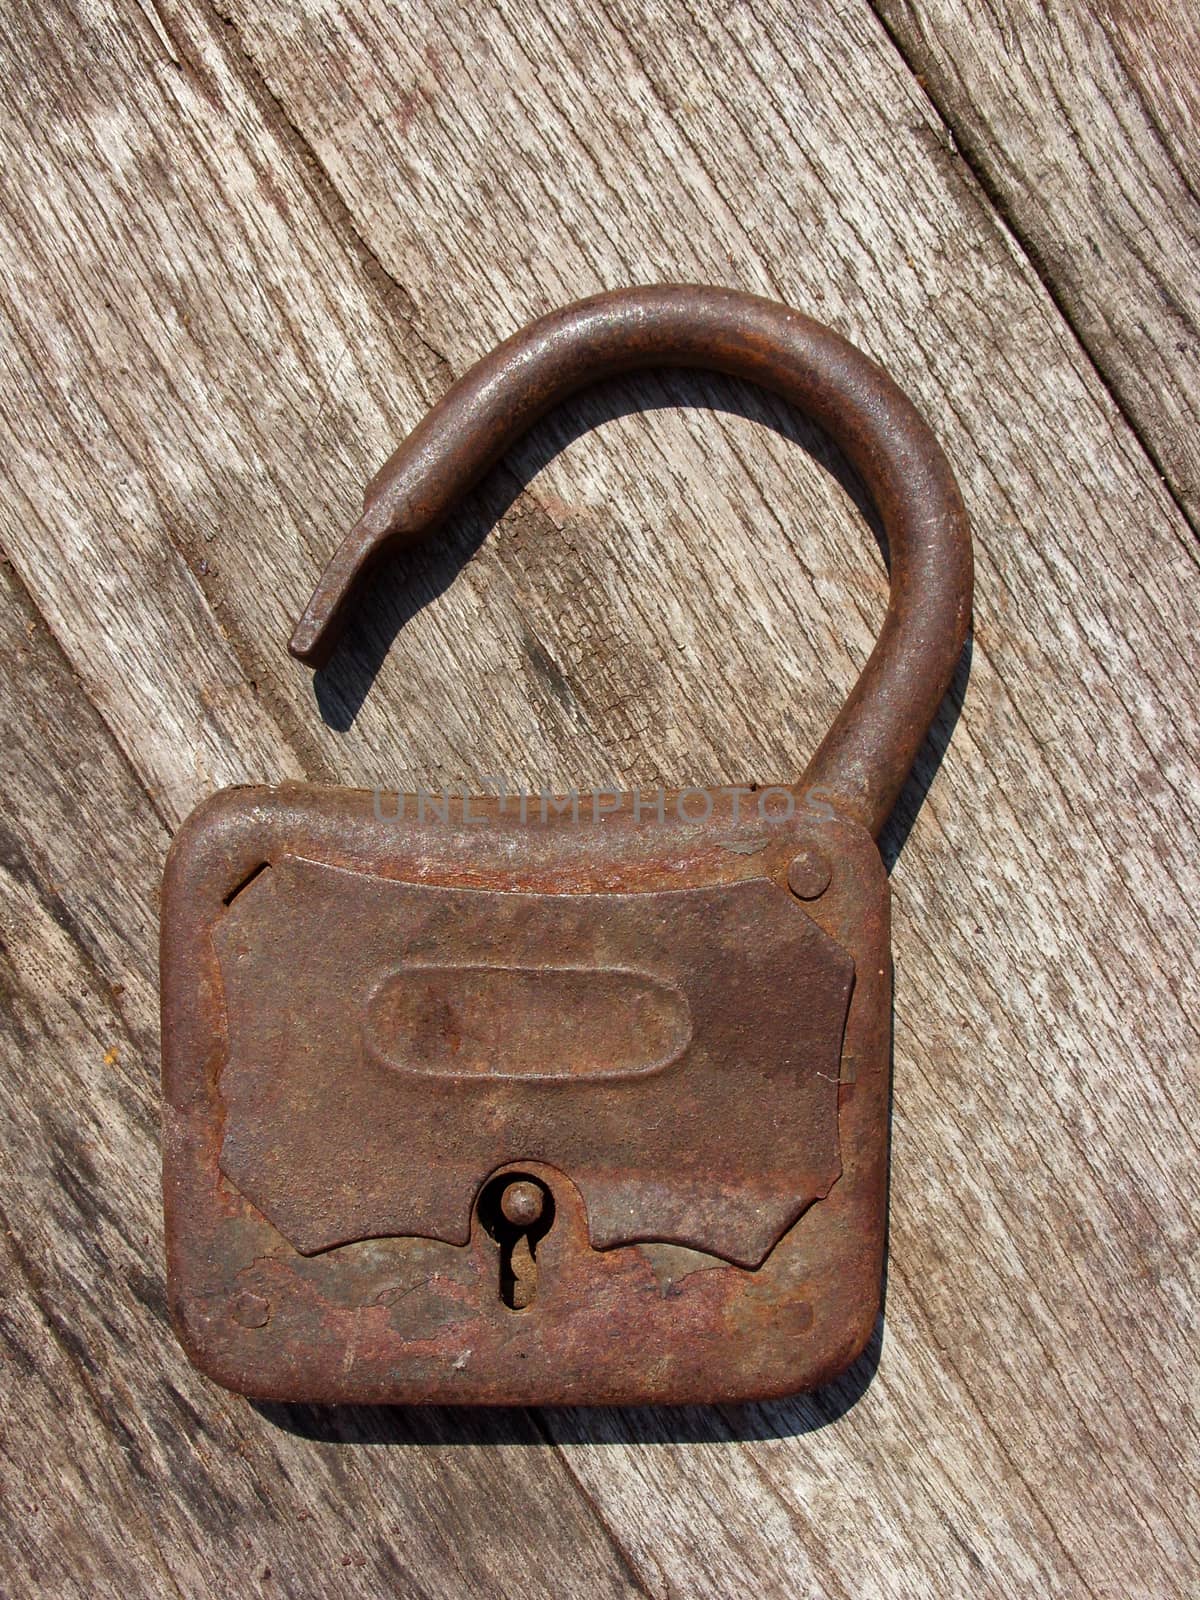 Old rusty padlock on wooden background